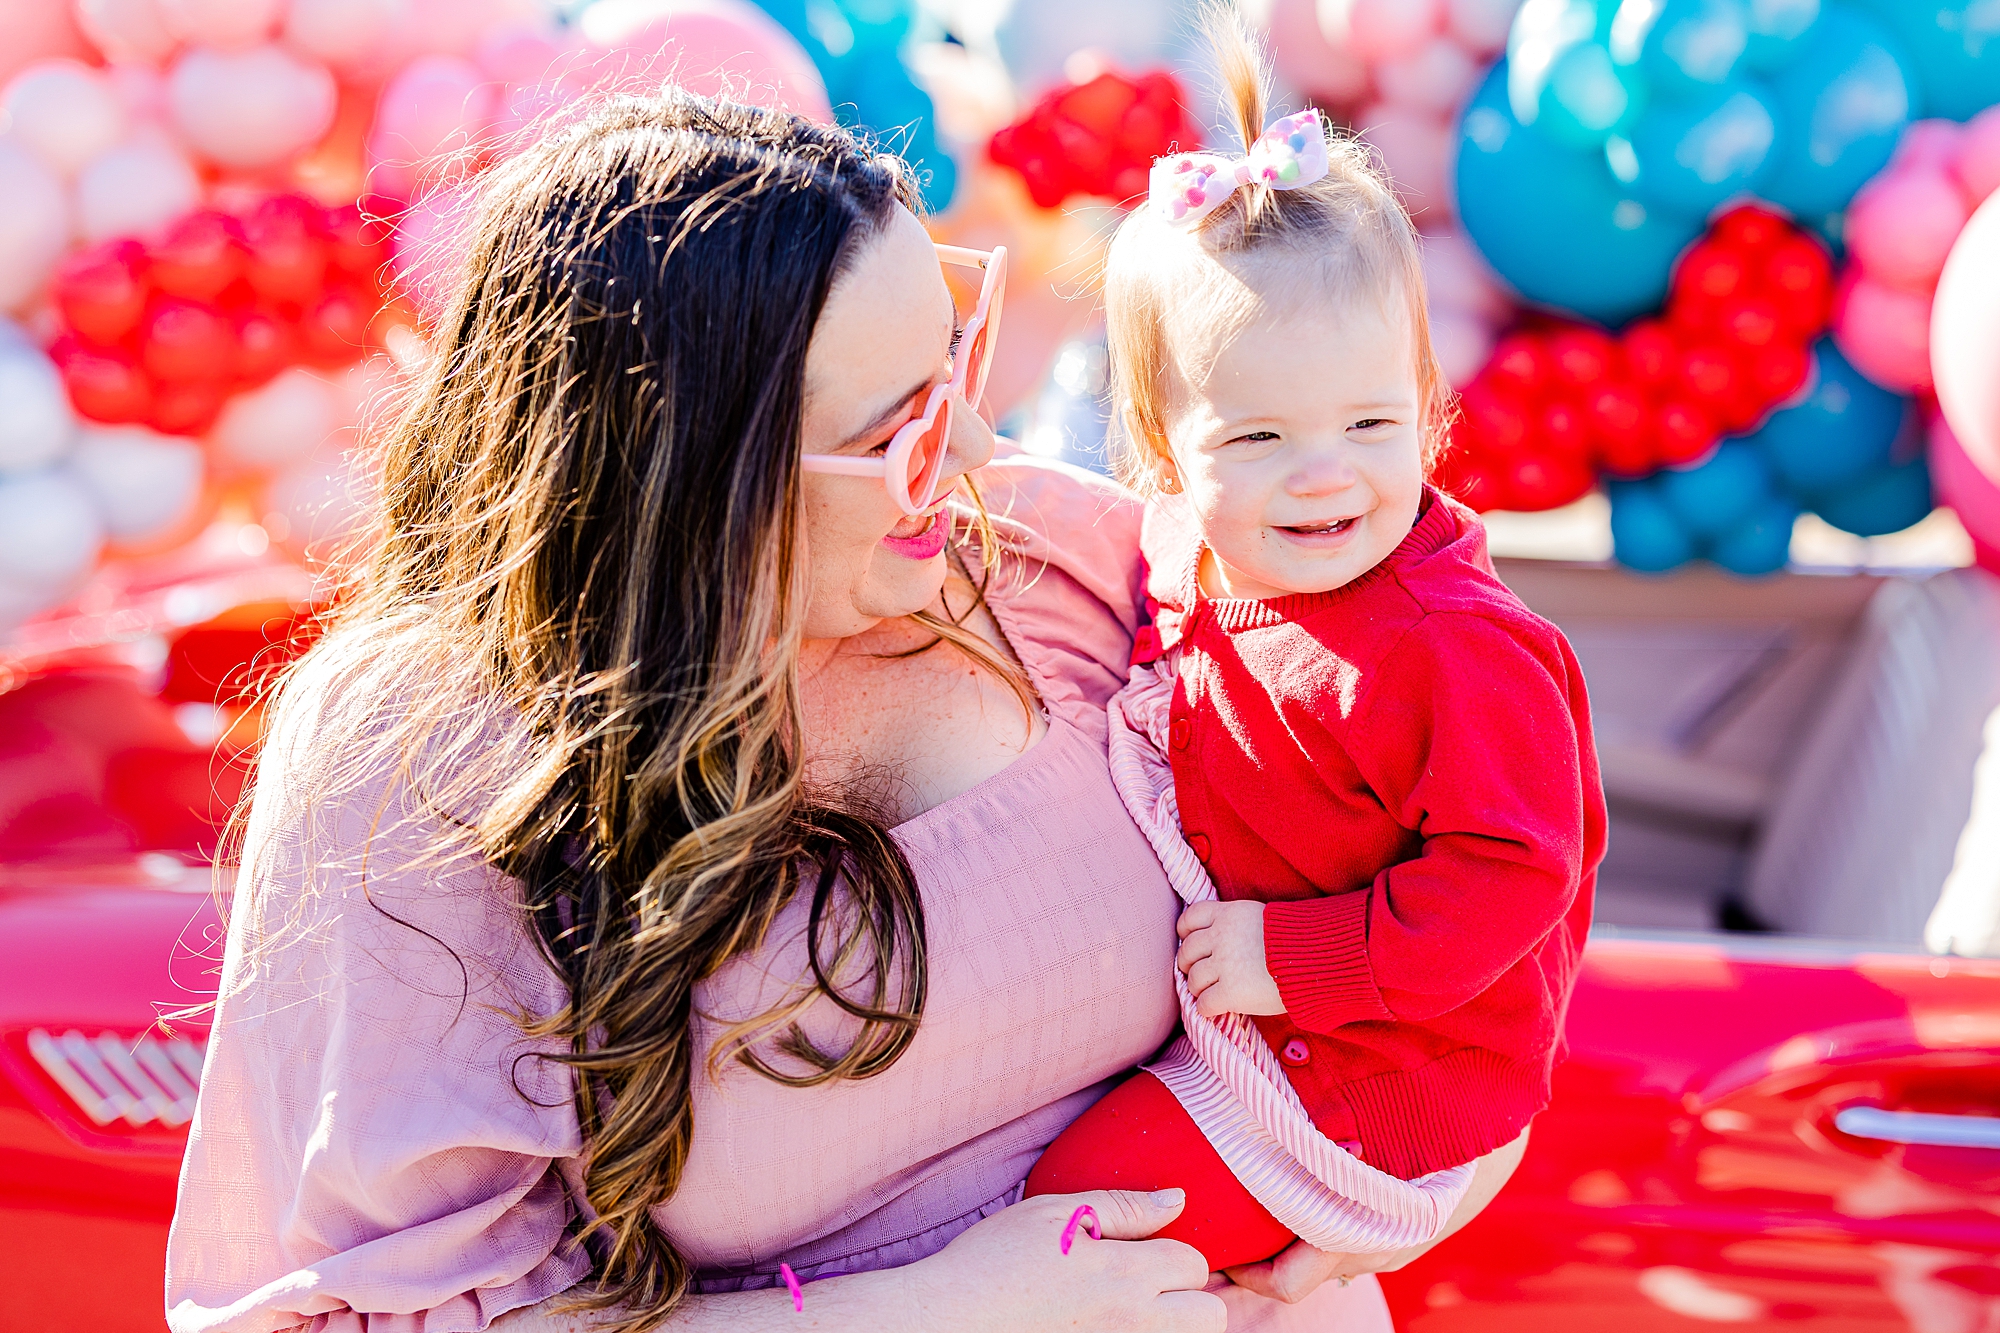 woman in pink dress smiles at daughter in red dress by Red Thunderbird 